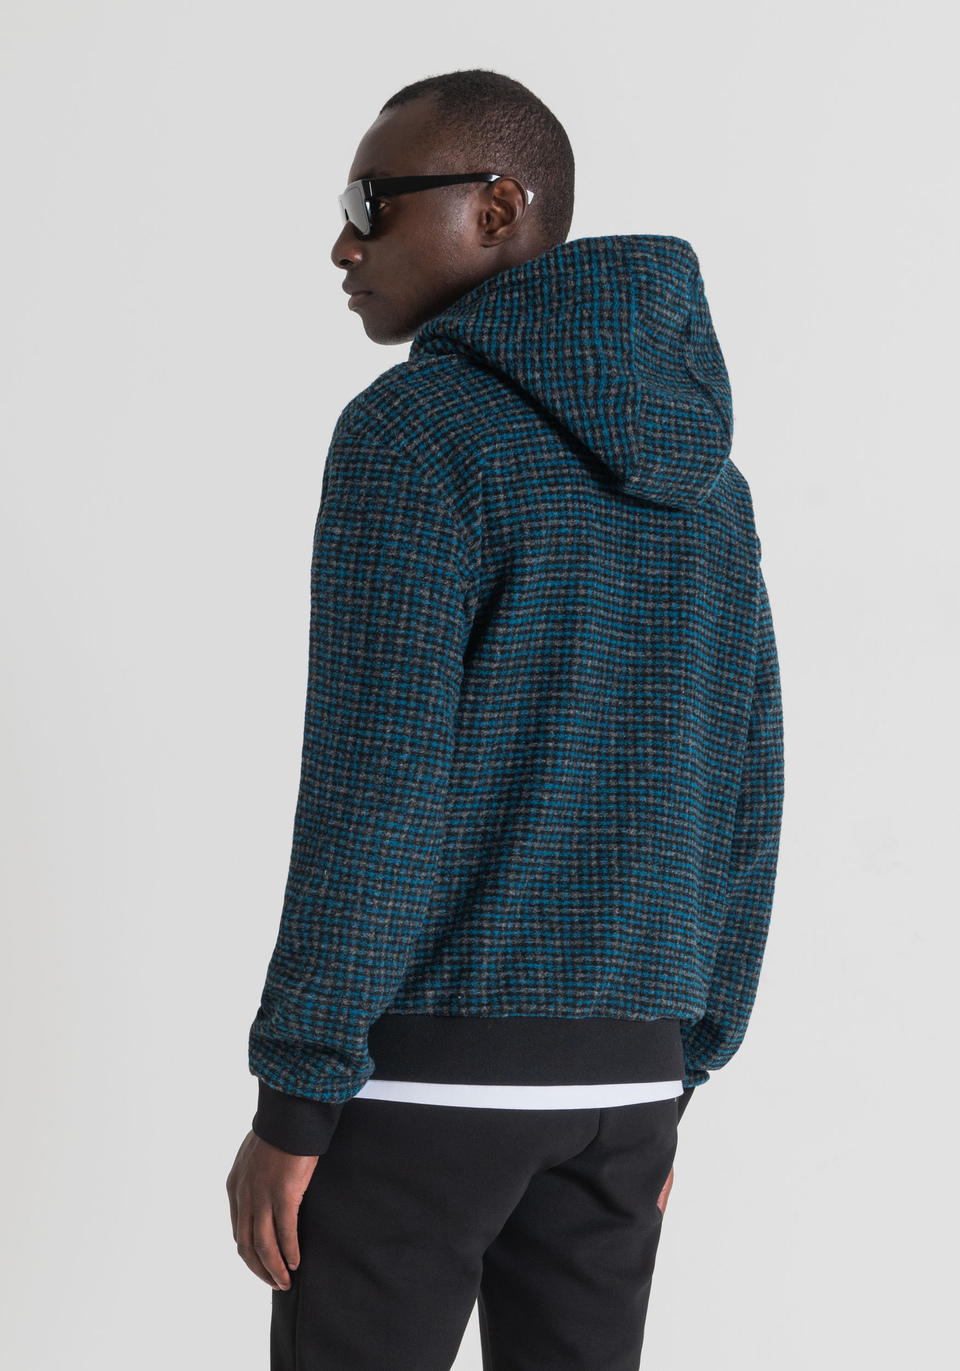 REGULAR-FIT HOODED SWEATSHIRT IN WOOL BLEND WITH ALL-OVER MICRO-PATTERN - Antony Morato Online Shop